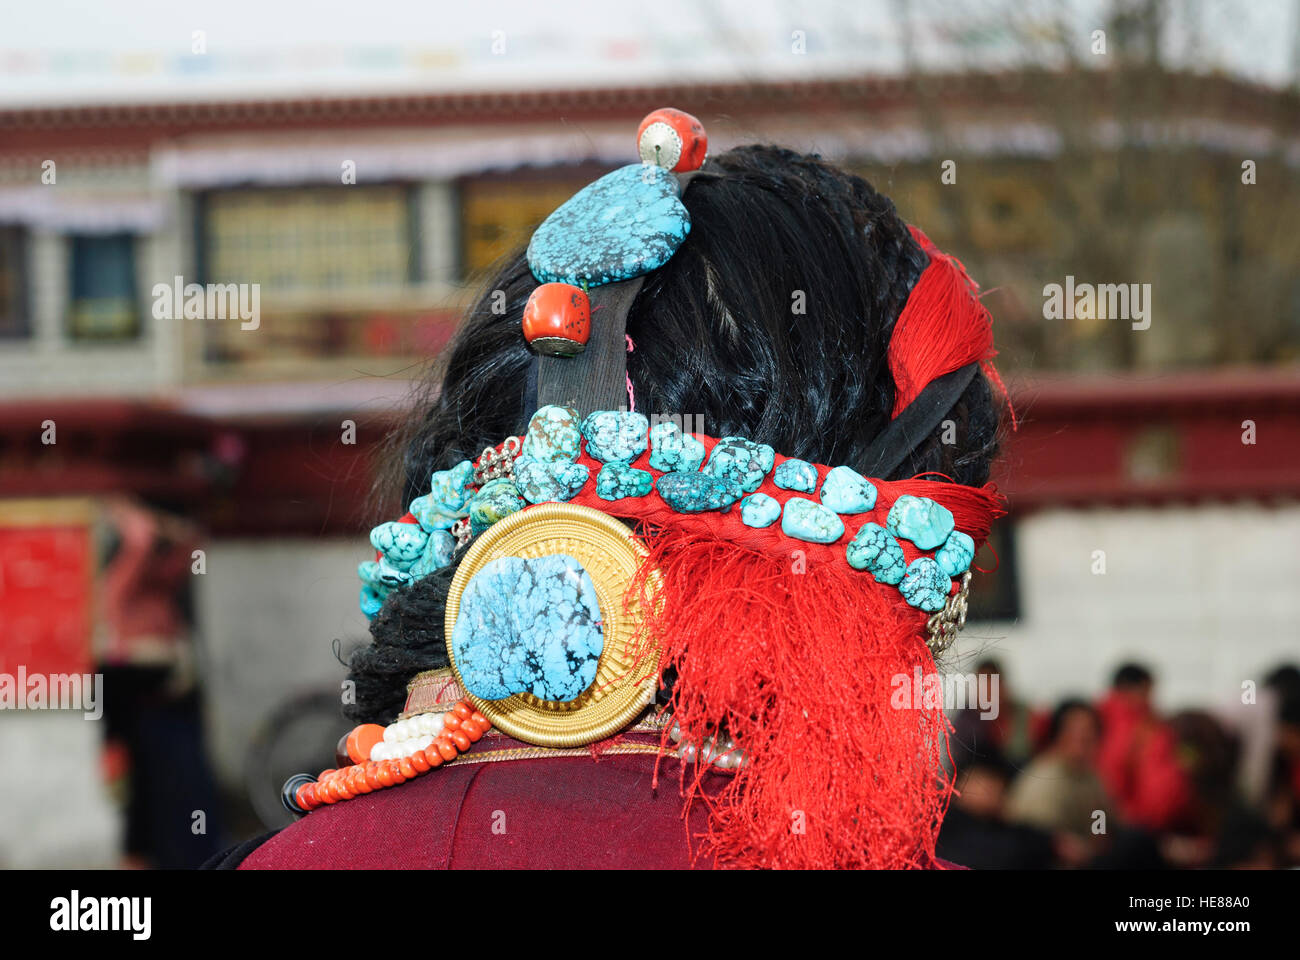 Lhasa: Jokhang Temple; Tibetan woman, headdress of turquoise, coral, amber and pearls worn at festivals like the Tibetan New Year (Losar), Tibet, Chin Stock Photo